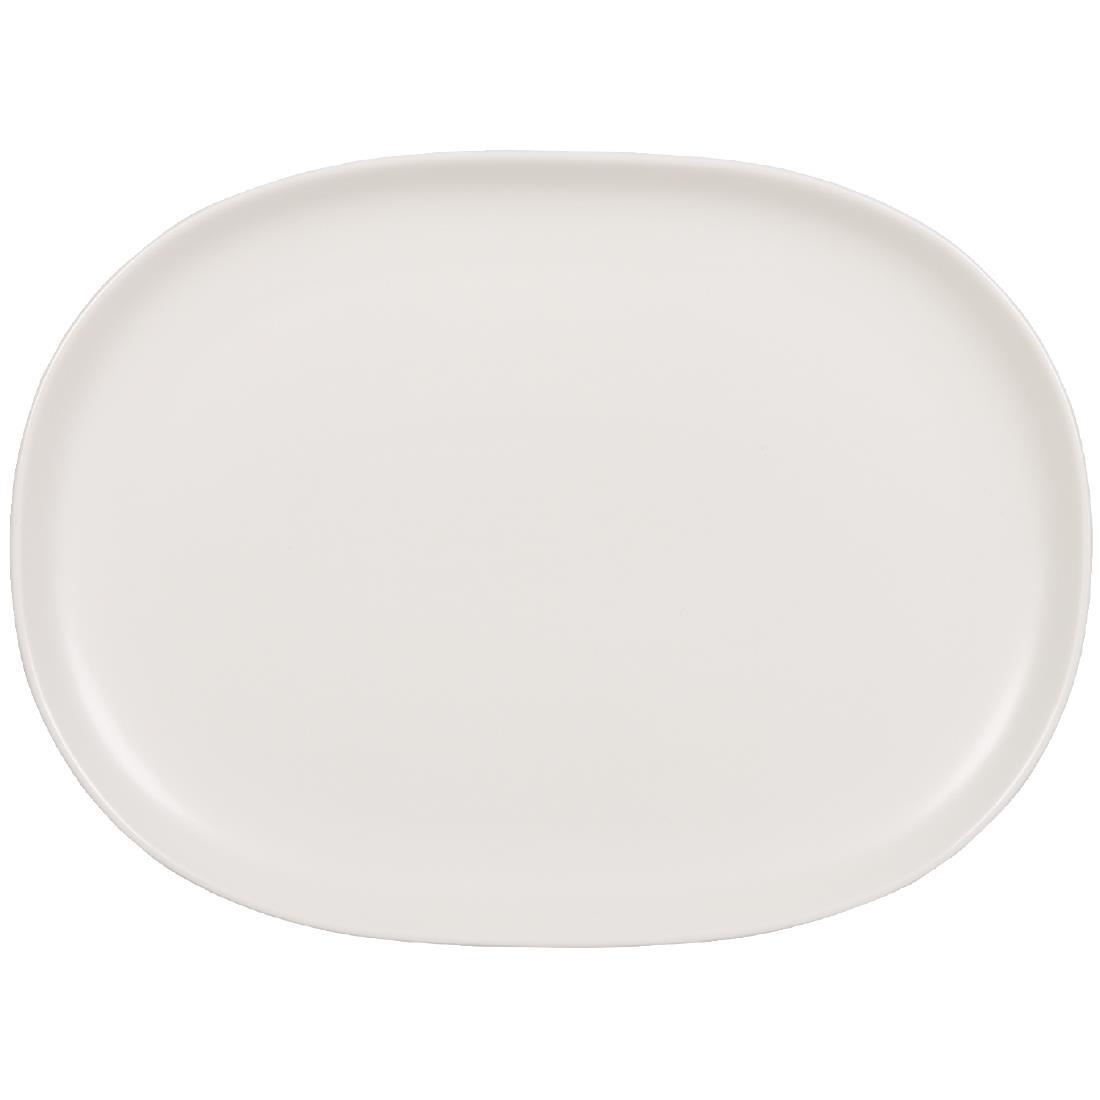 Churchill Alchemy Moonstone Oval Plates 288mm (Pack of 6) - DN518  - 1